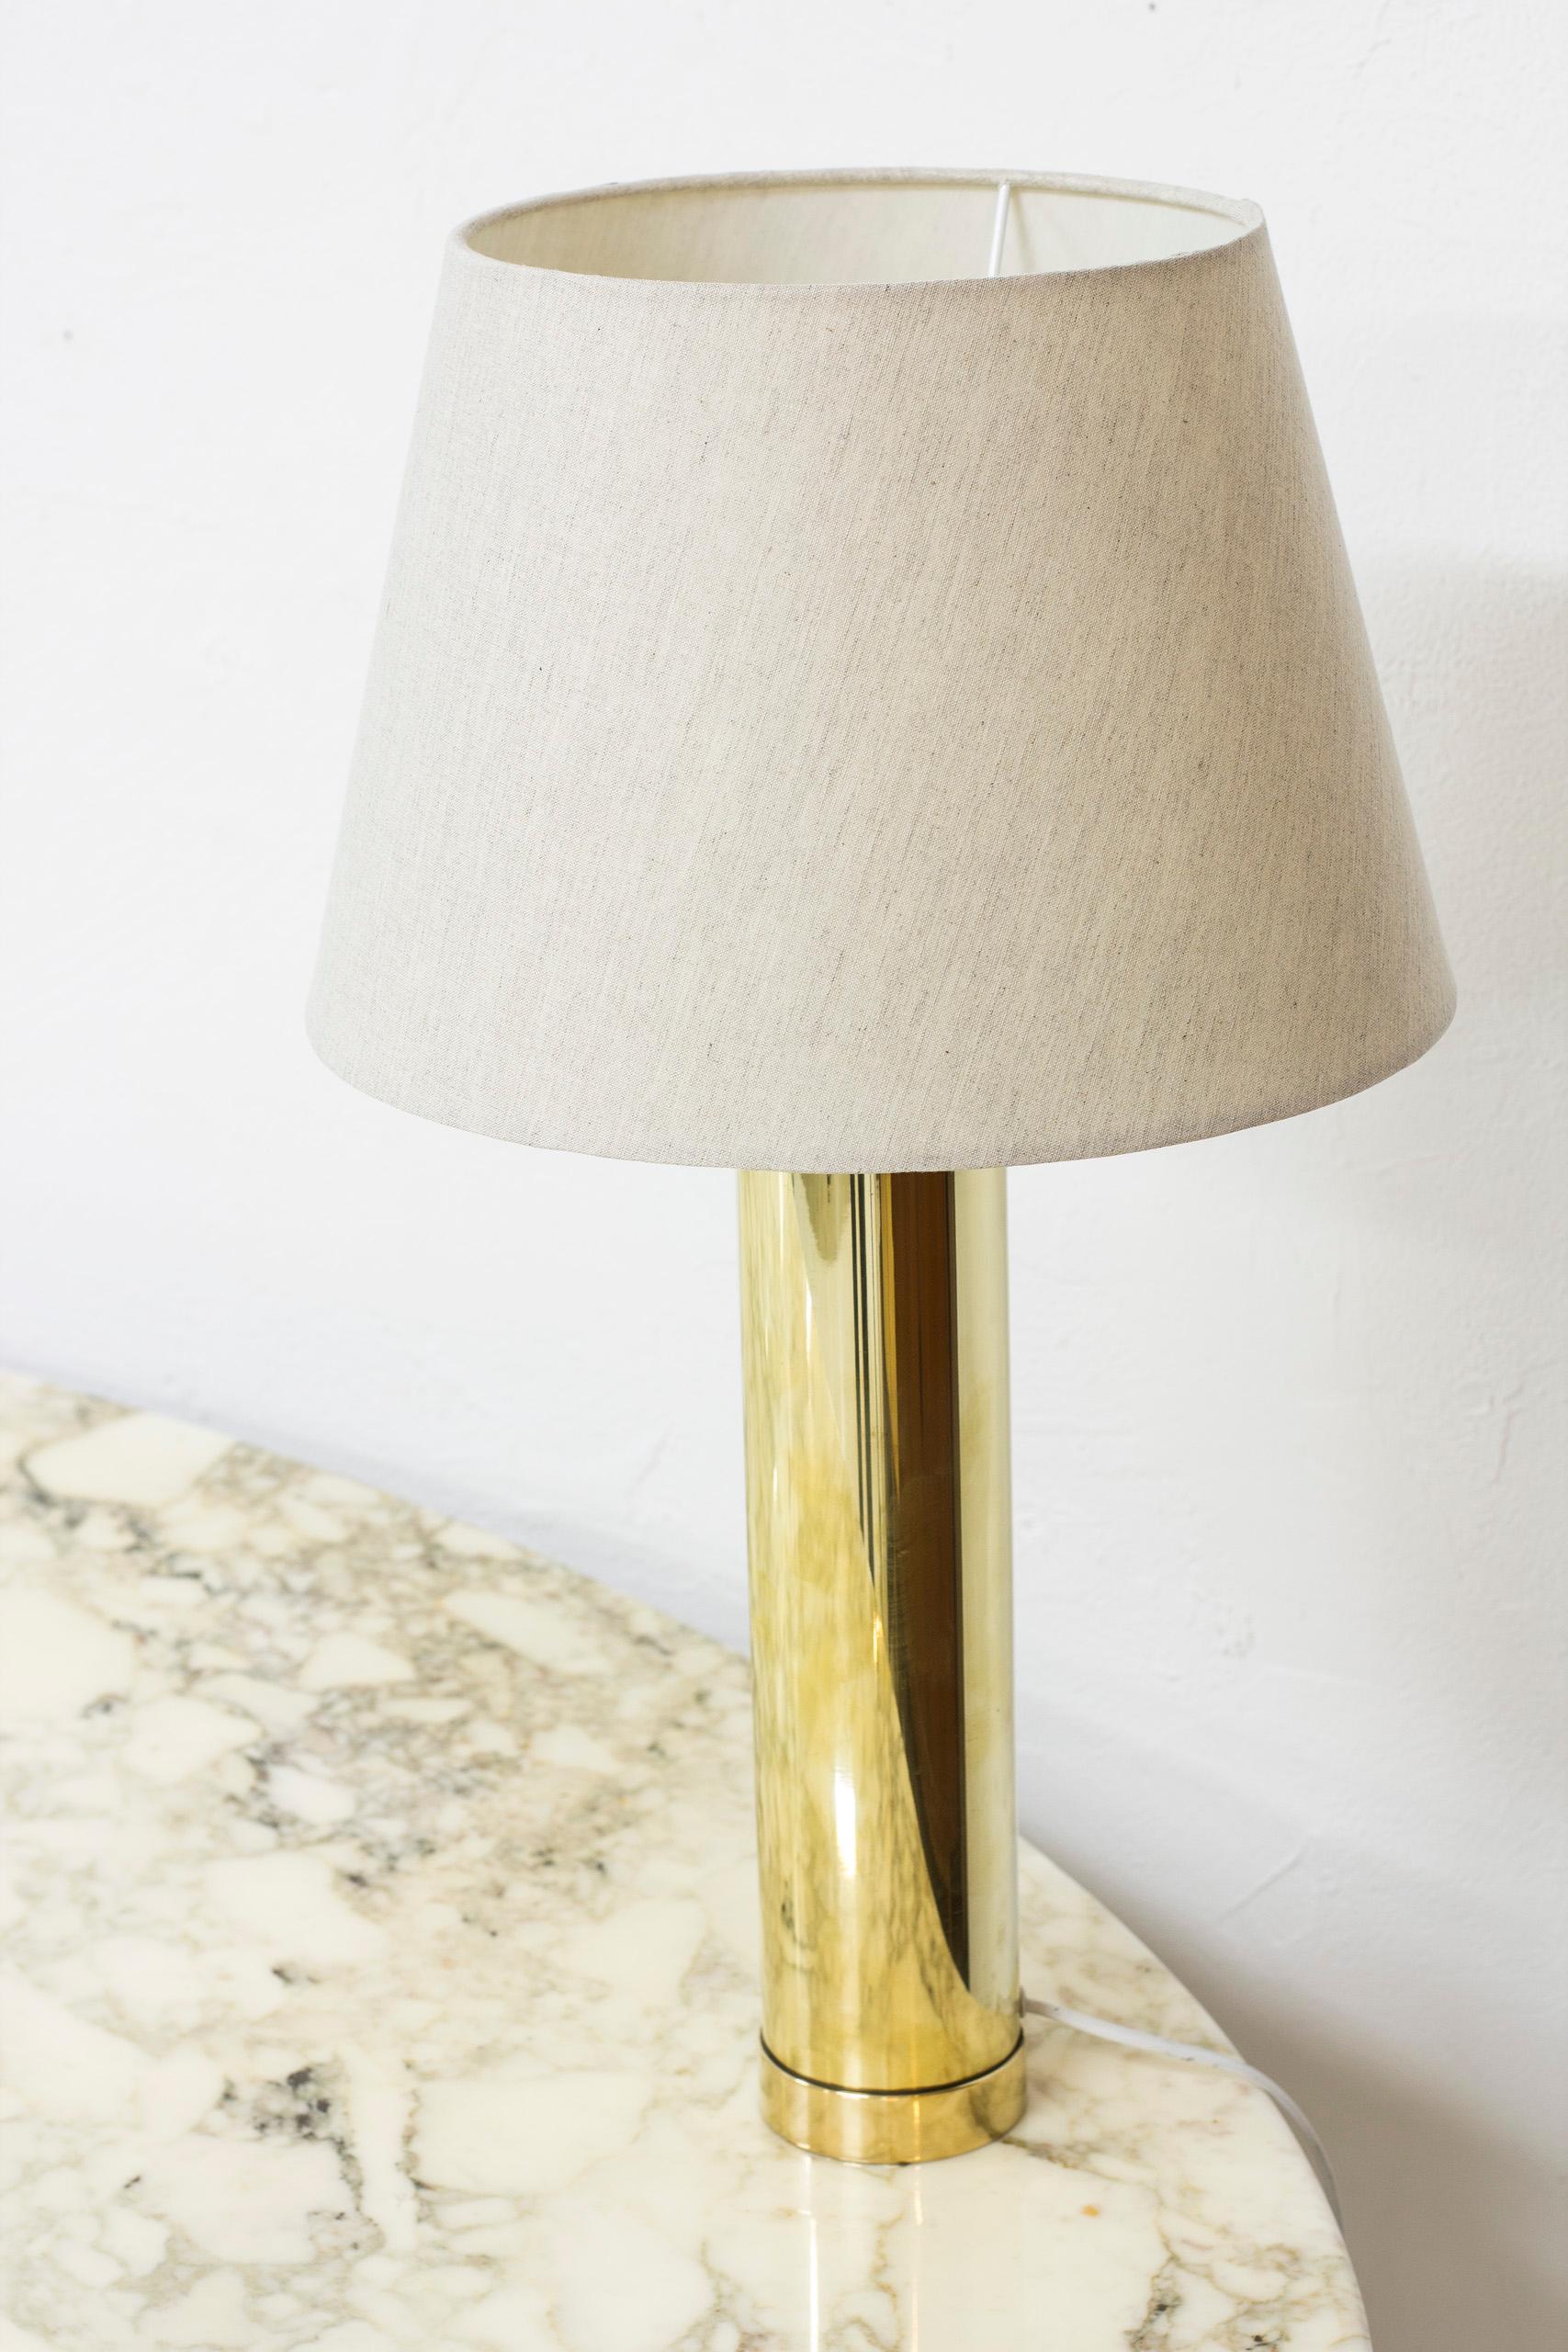 Table lamp model number 